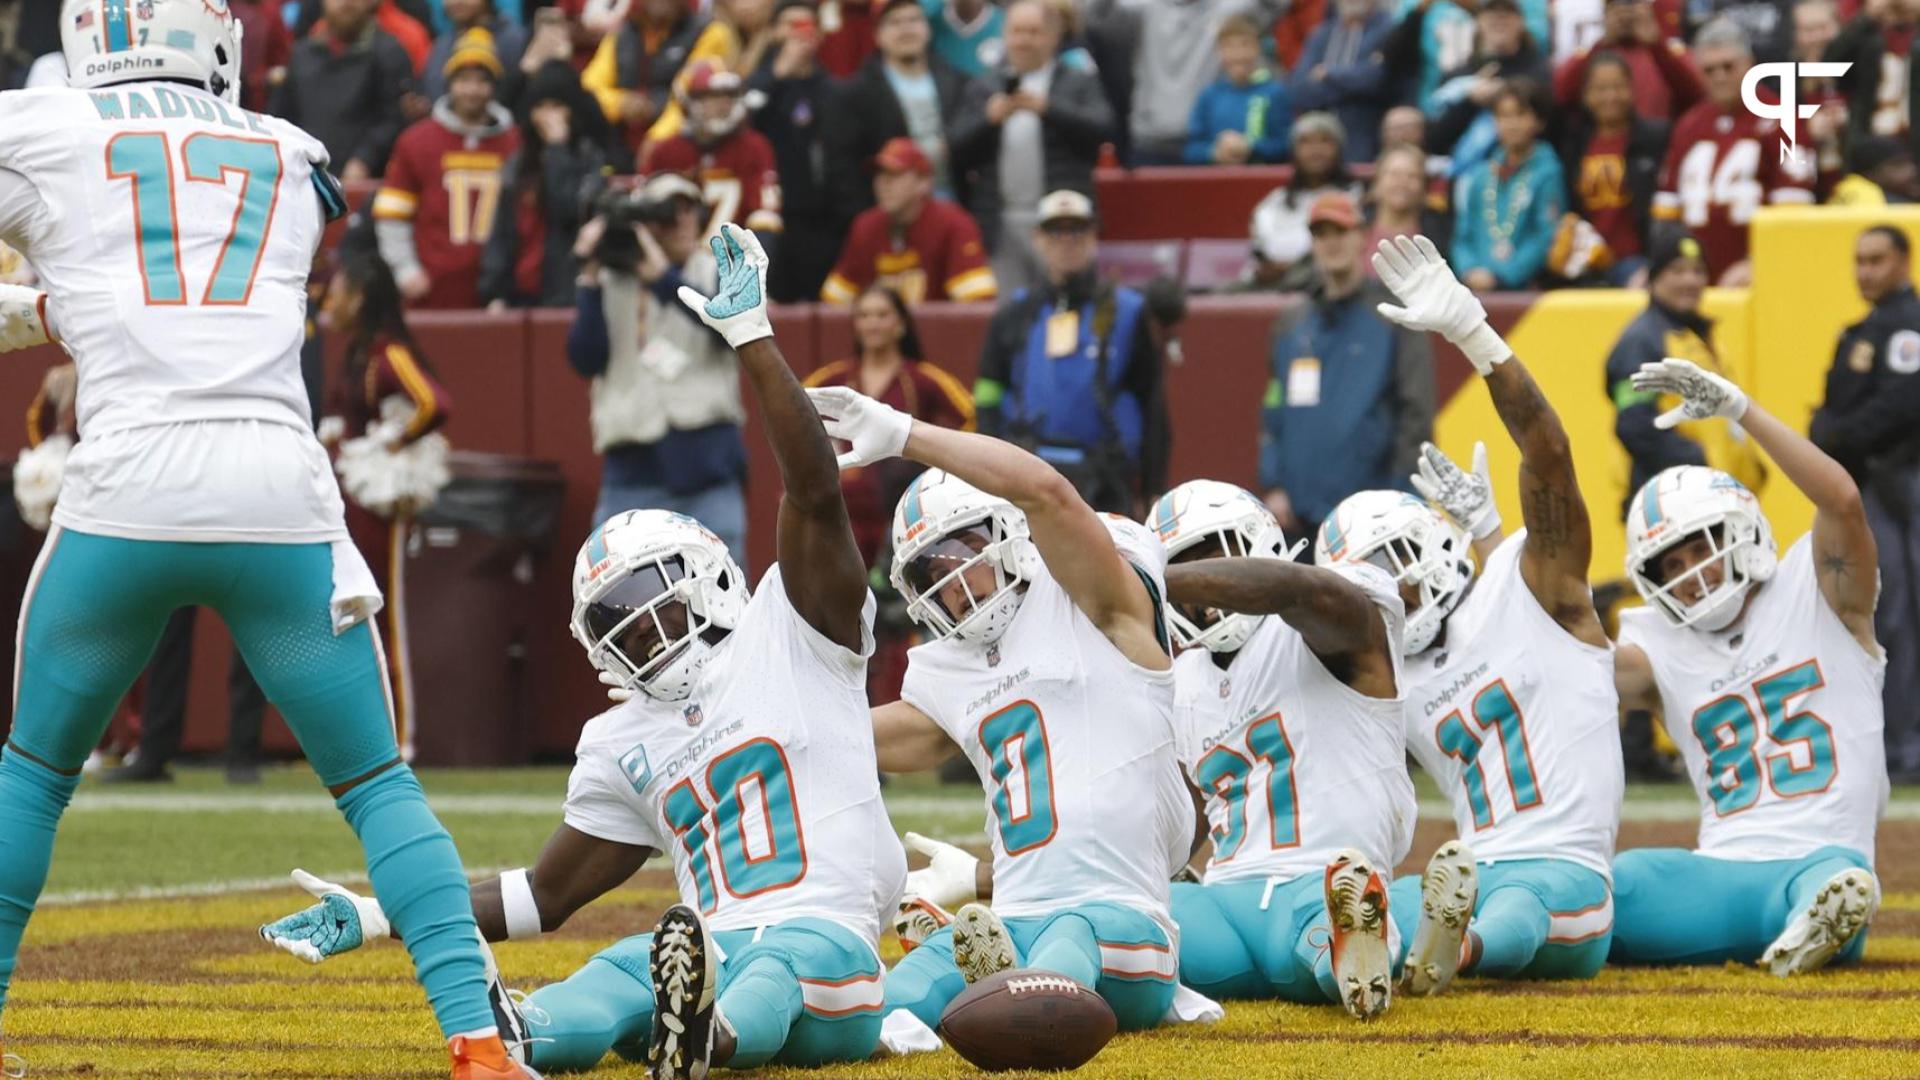 Miami Dolphins wide receiver Tyreek Hill (10) celebrates with teammates in the end zone after catching a touchdown pass against the Washington Commanders during the first quarter at FedExField.